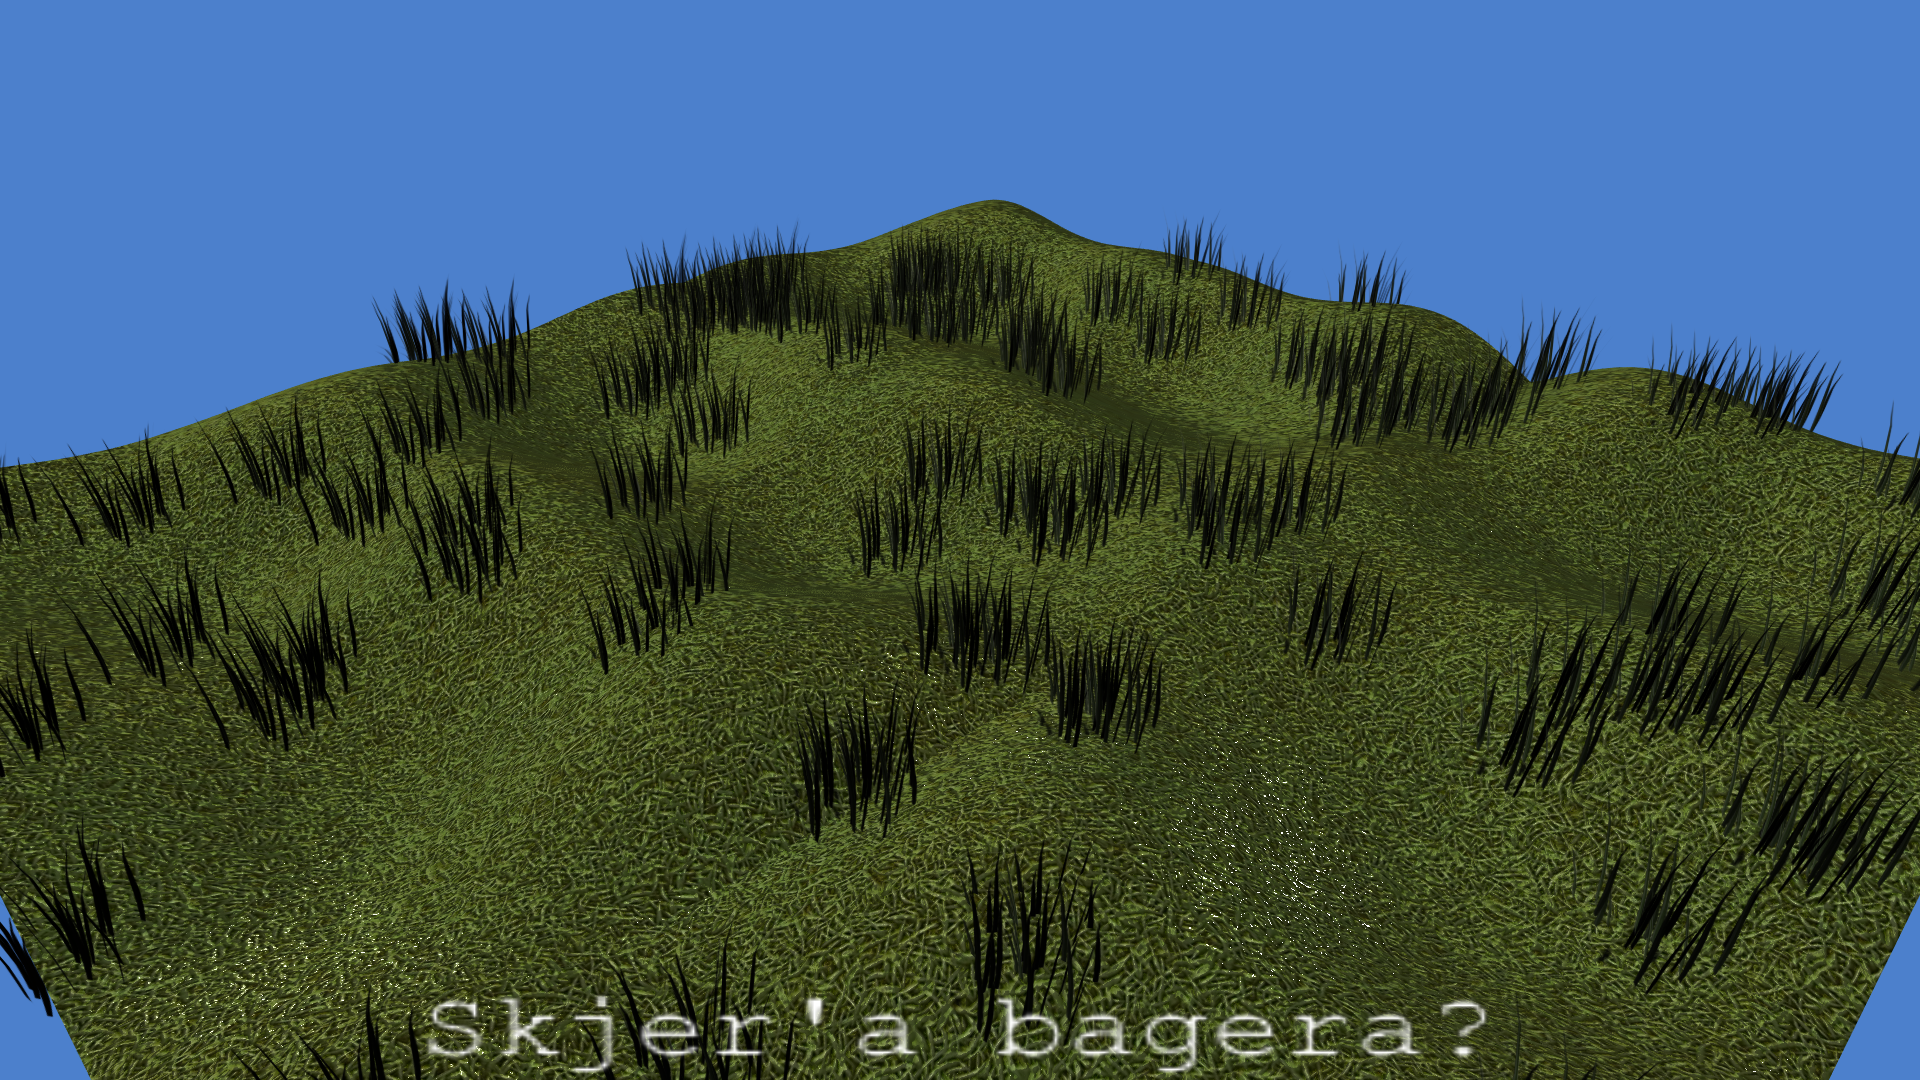 Grass model loaded, cloned and placed randomly throughout the scene